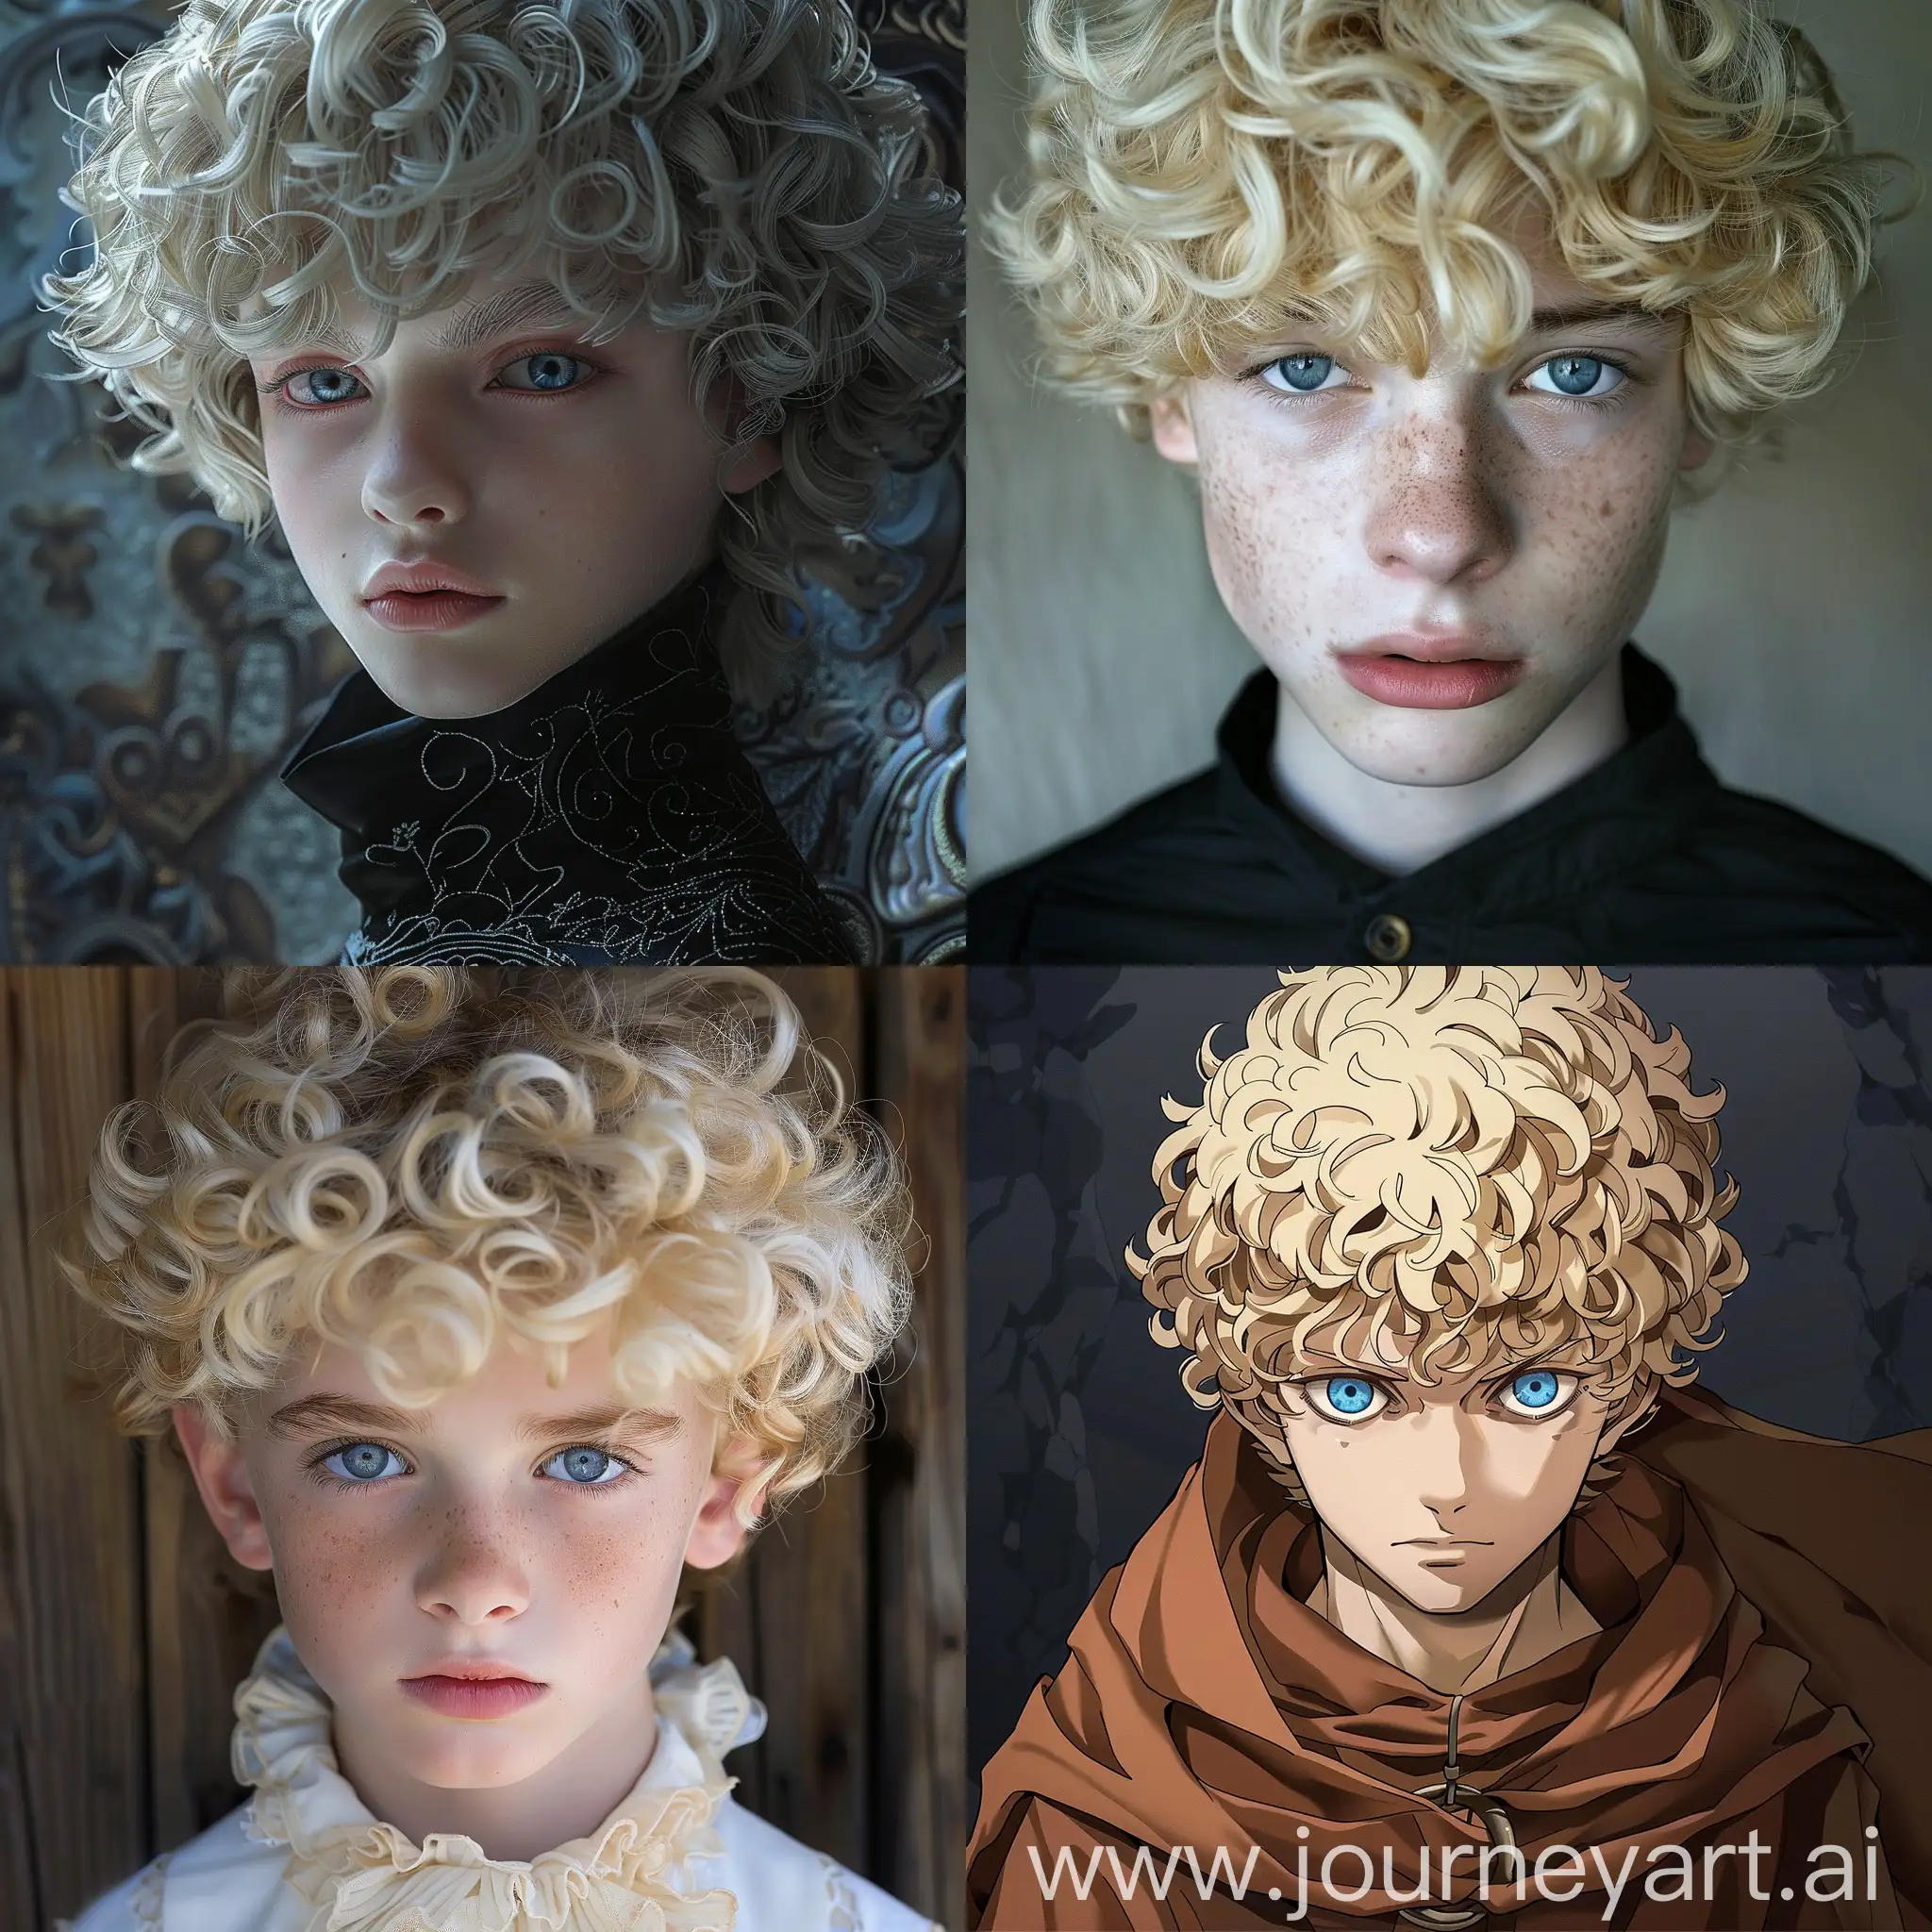 A 14-year-old waif boy priest of the domain of death with blond curly hair and blue eyes